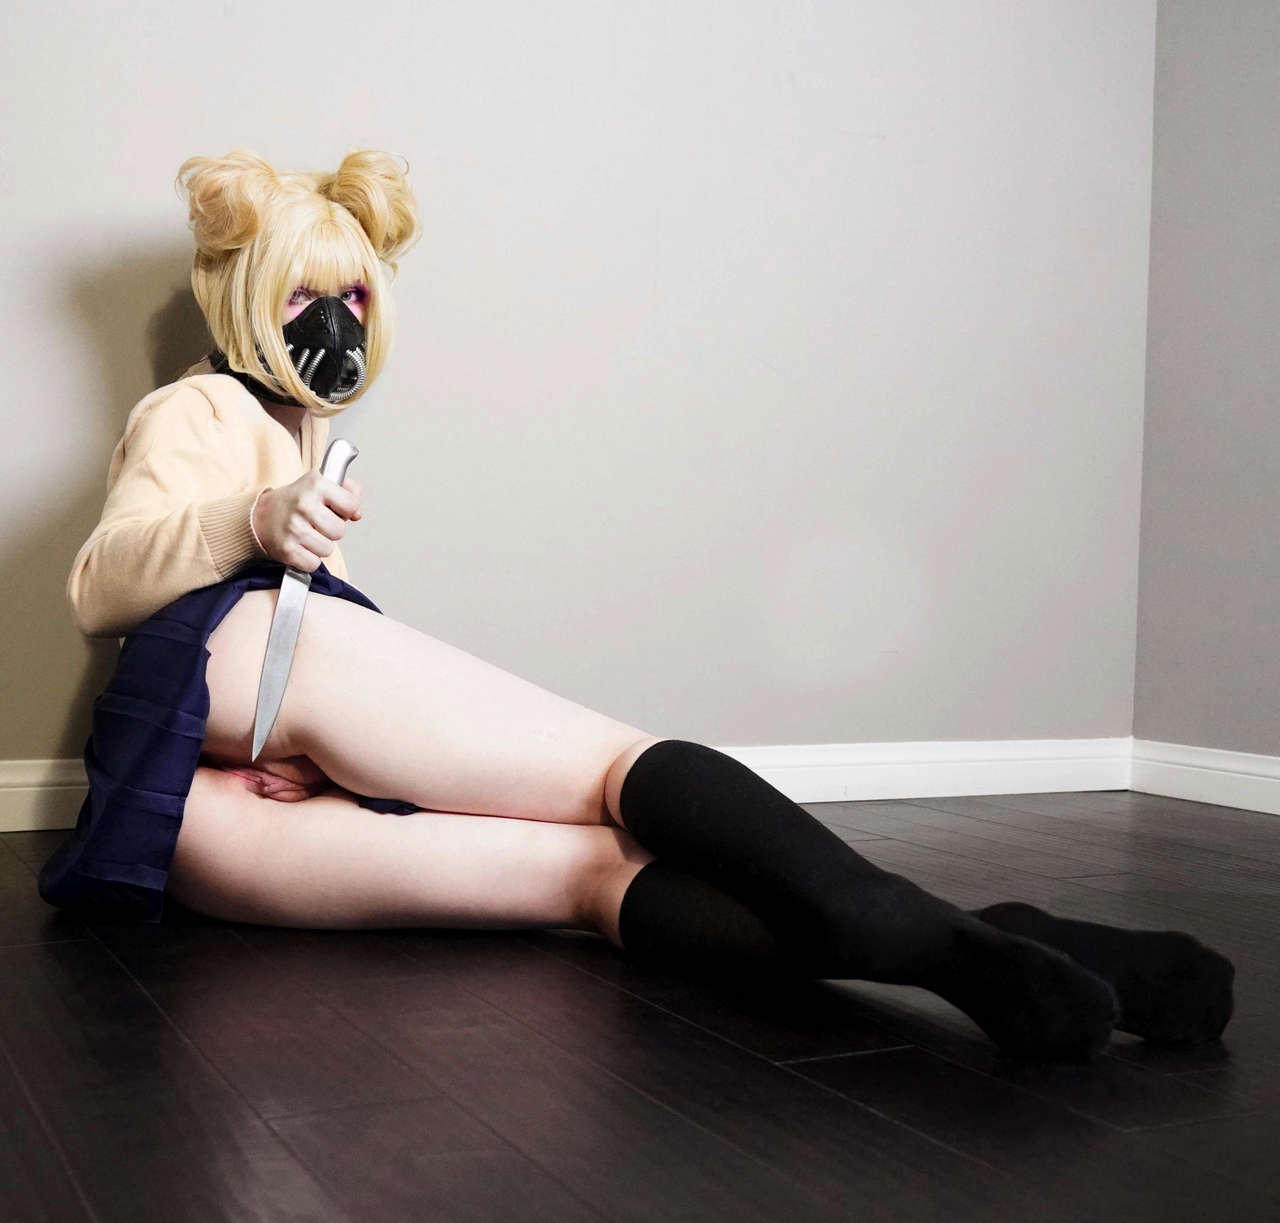 Himiko Toga From My Hero Academia By Your Virtual Sweetheart Sel